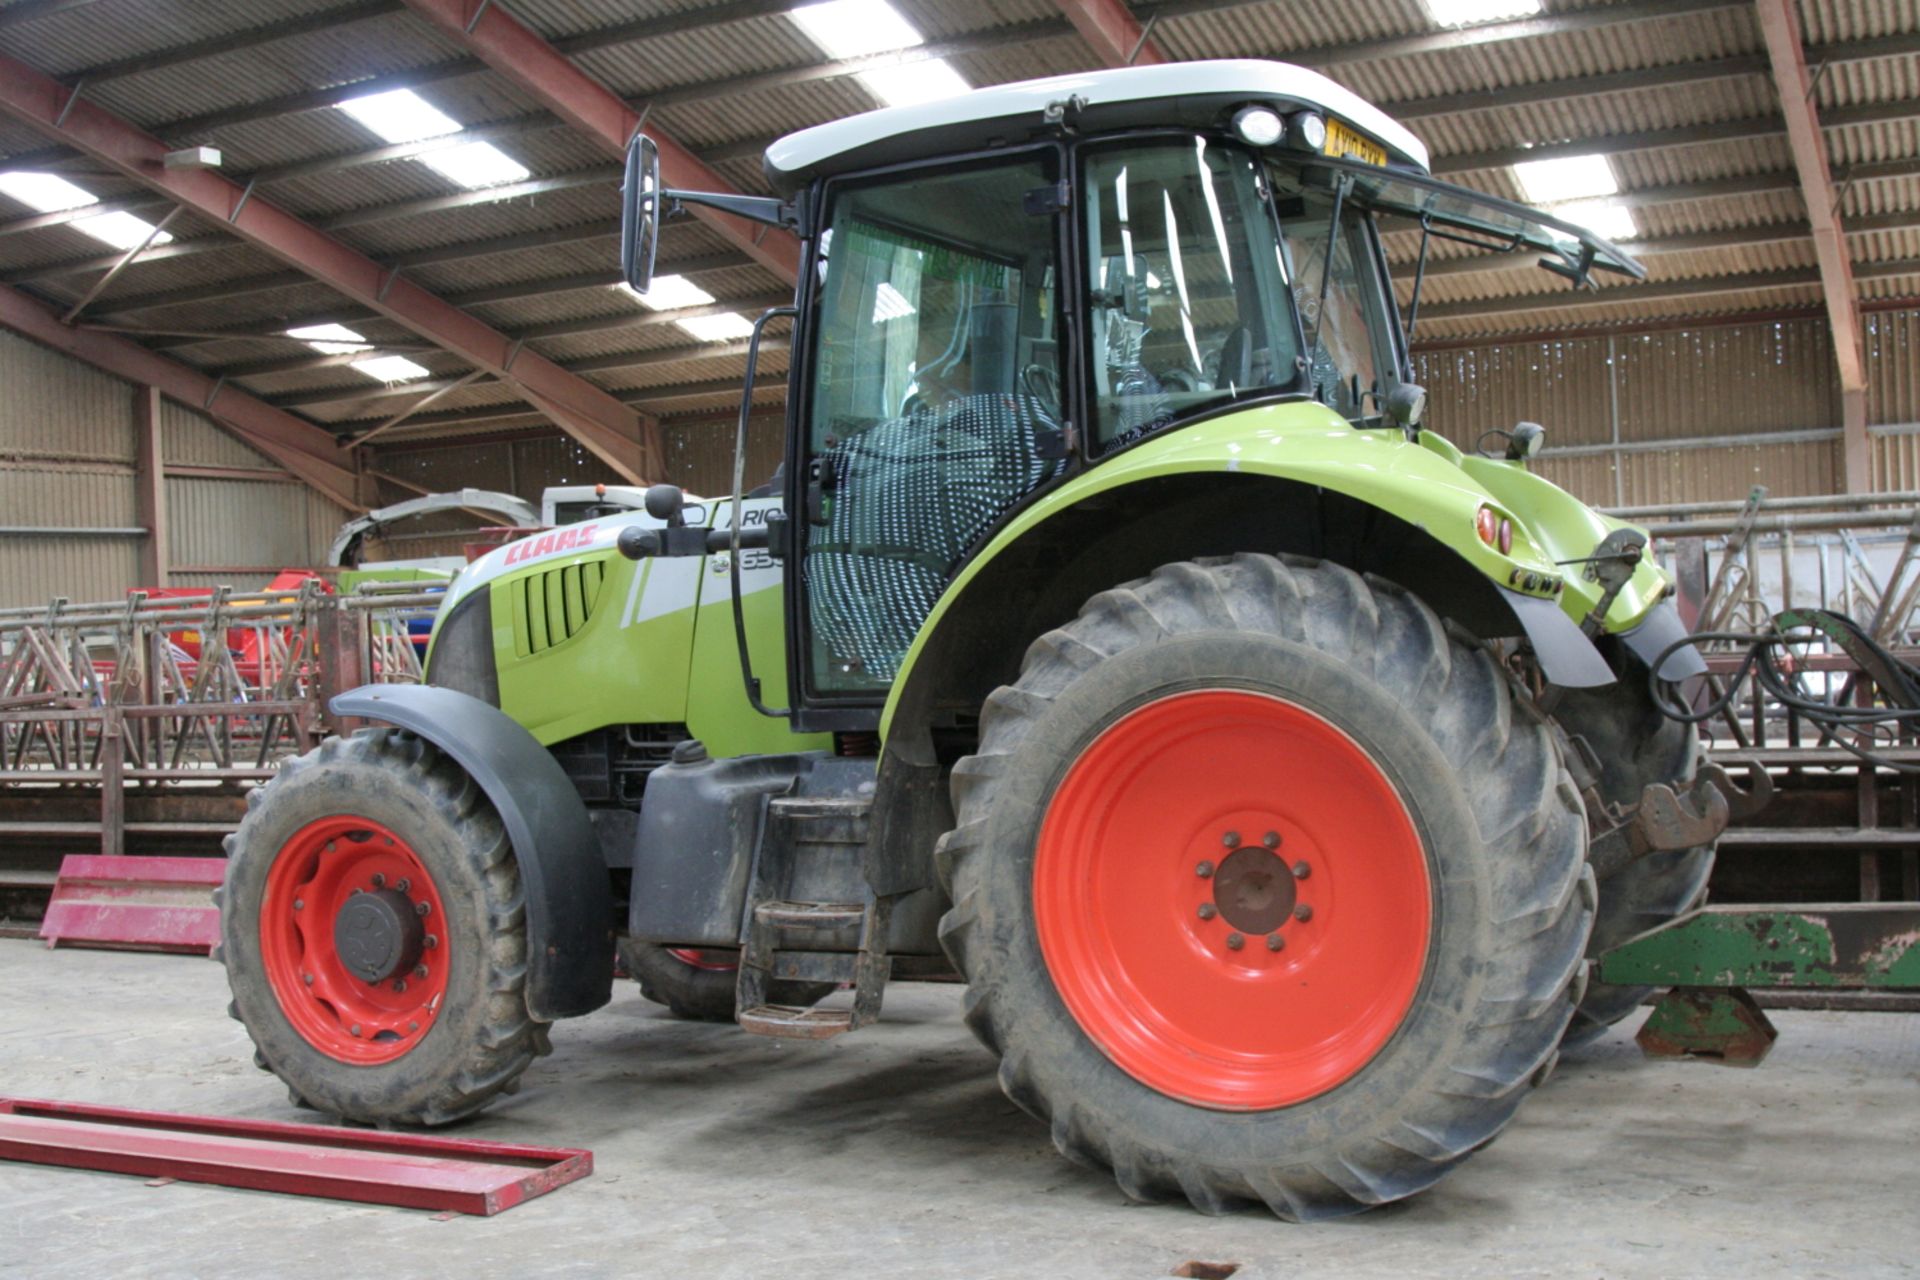 Claas Arion 630 Tractor 50k AY10 BXW 6,673 hours - Image 6 of 10